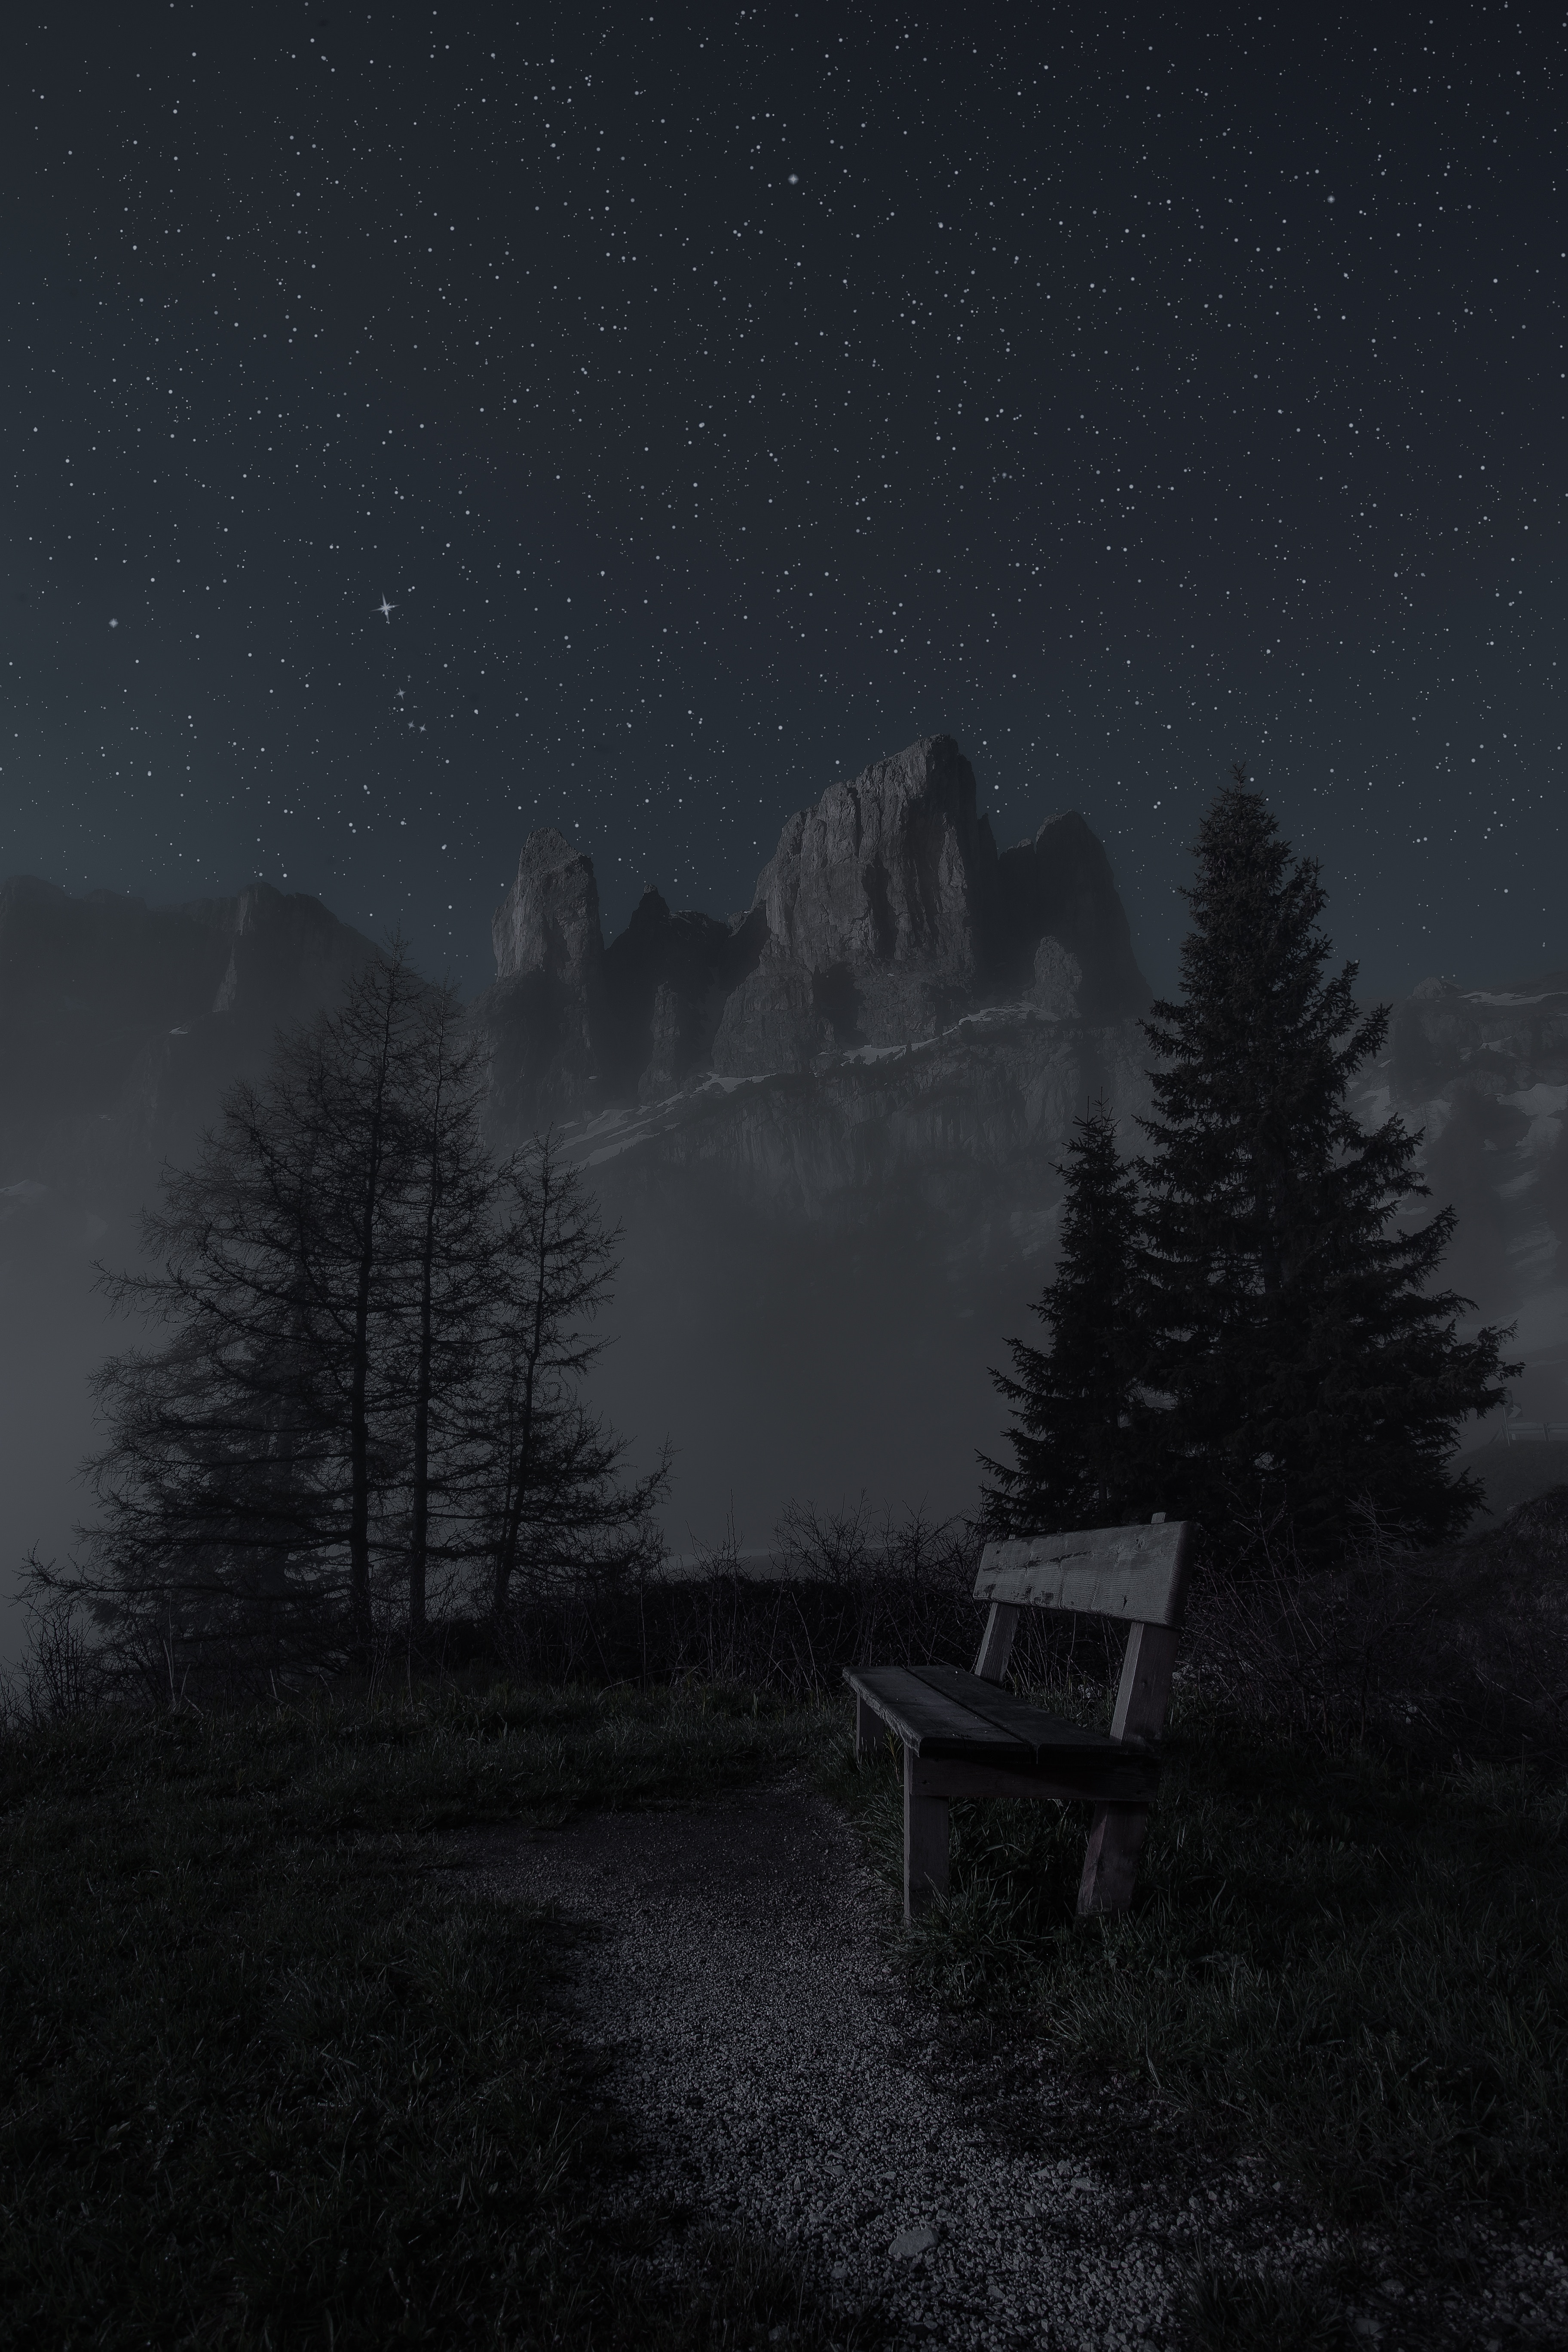 overview, landscape, dark, bench, trees, mountains, night, starry sky, review